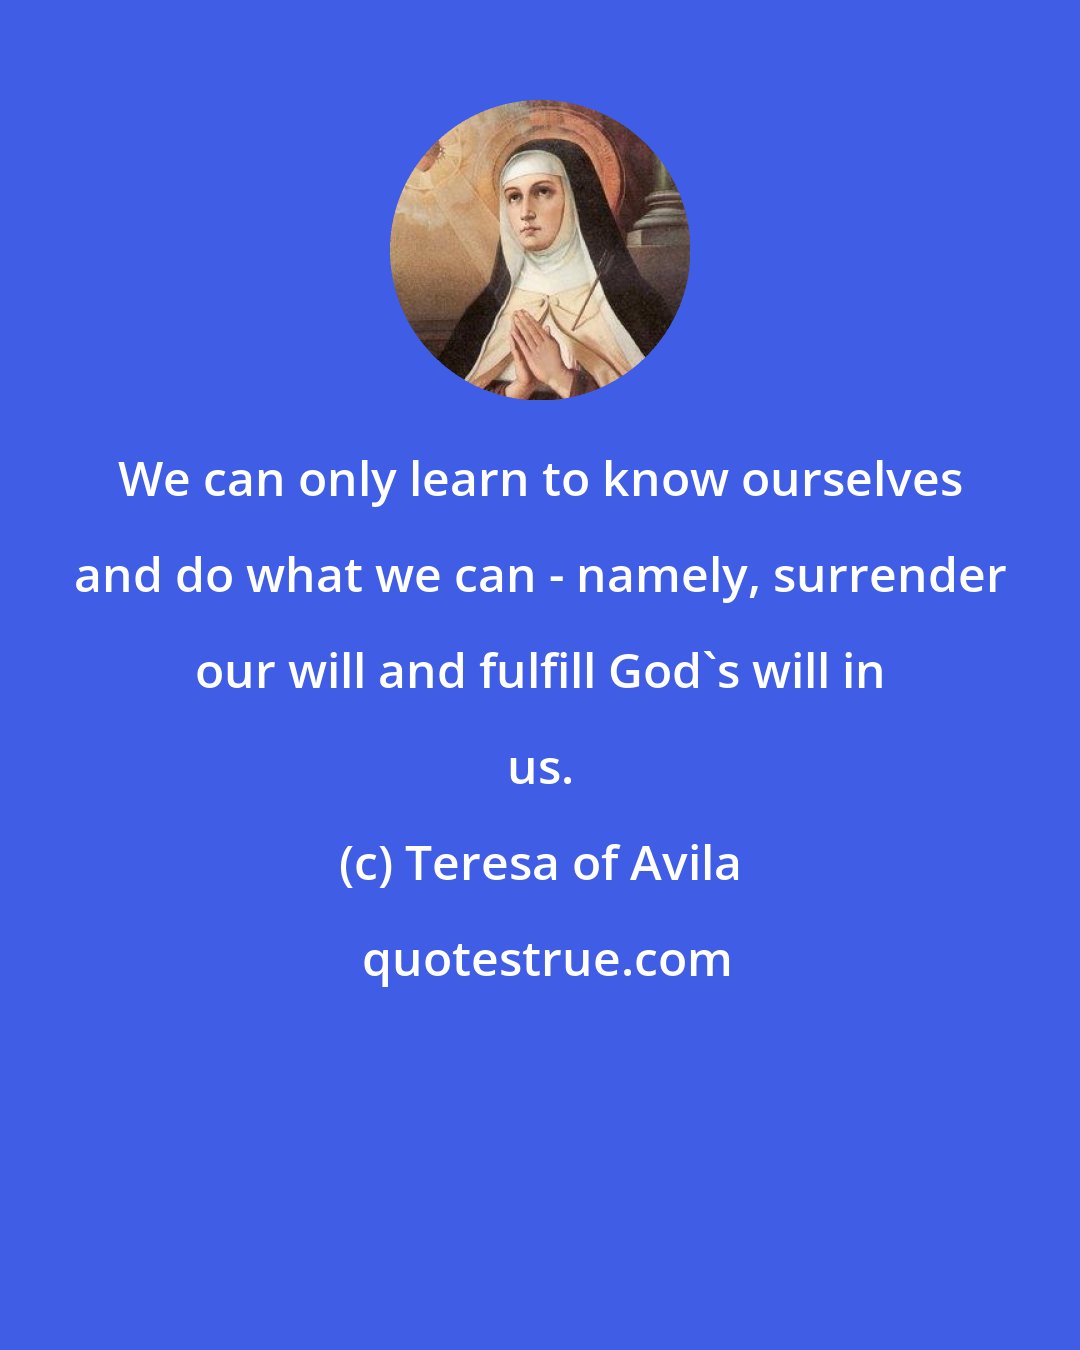 Teresa of Avila: We can only learn to know ourselves and do what we can - namely, surrender our will and fulfill God's will in us.